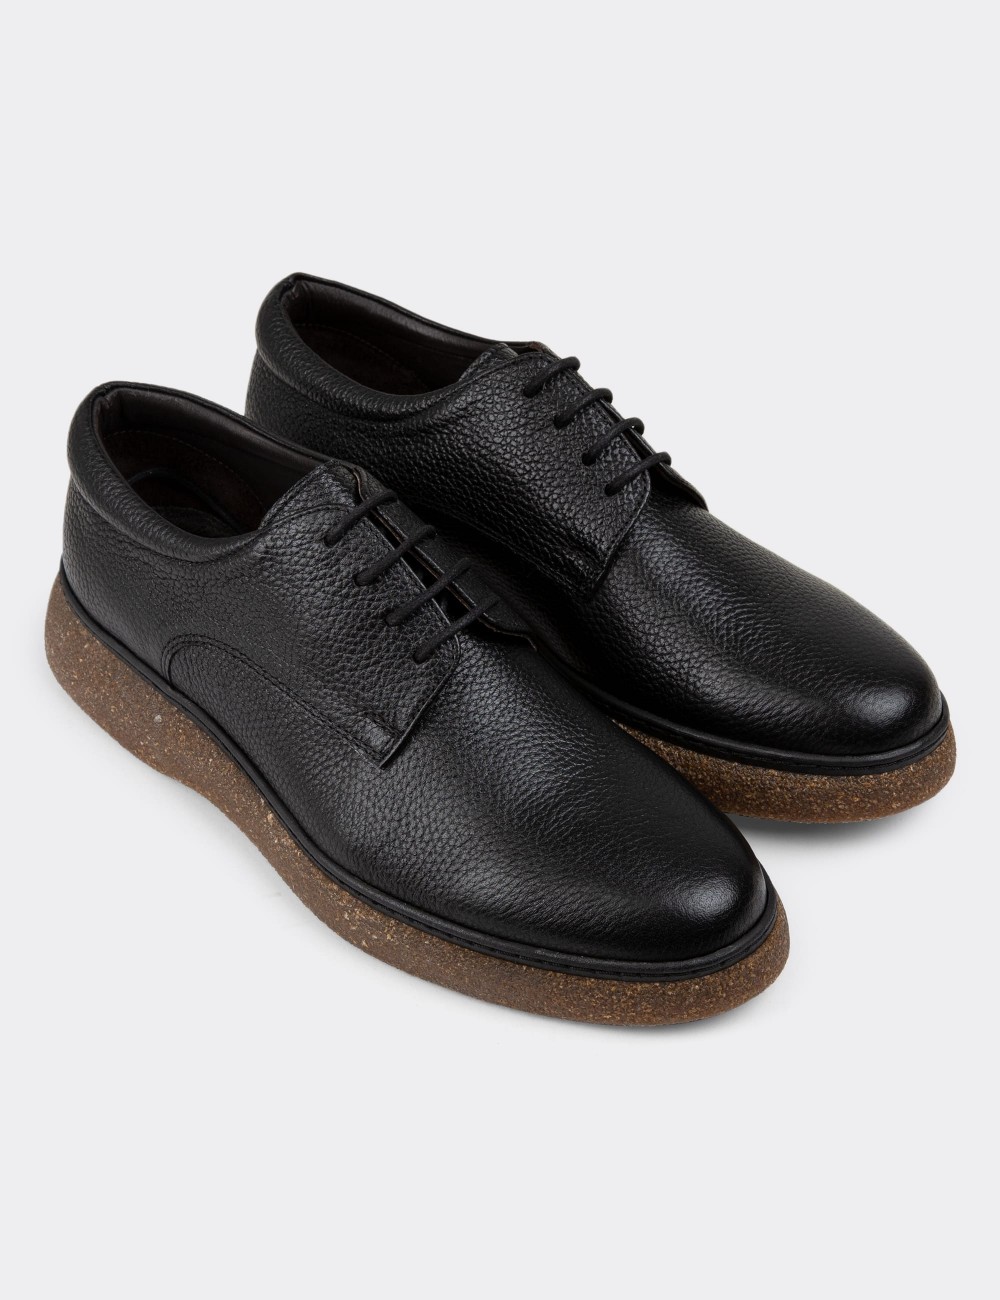 Black Leather Lace-up Shoes - 01934MSYHC02